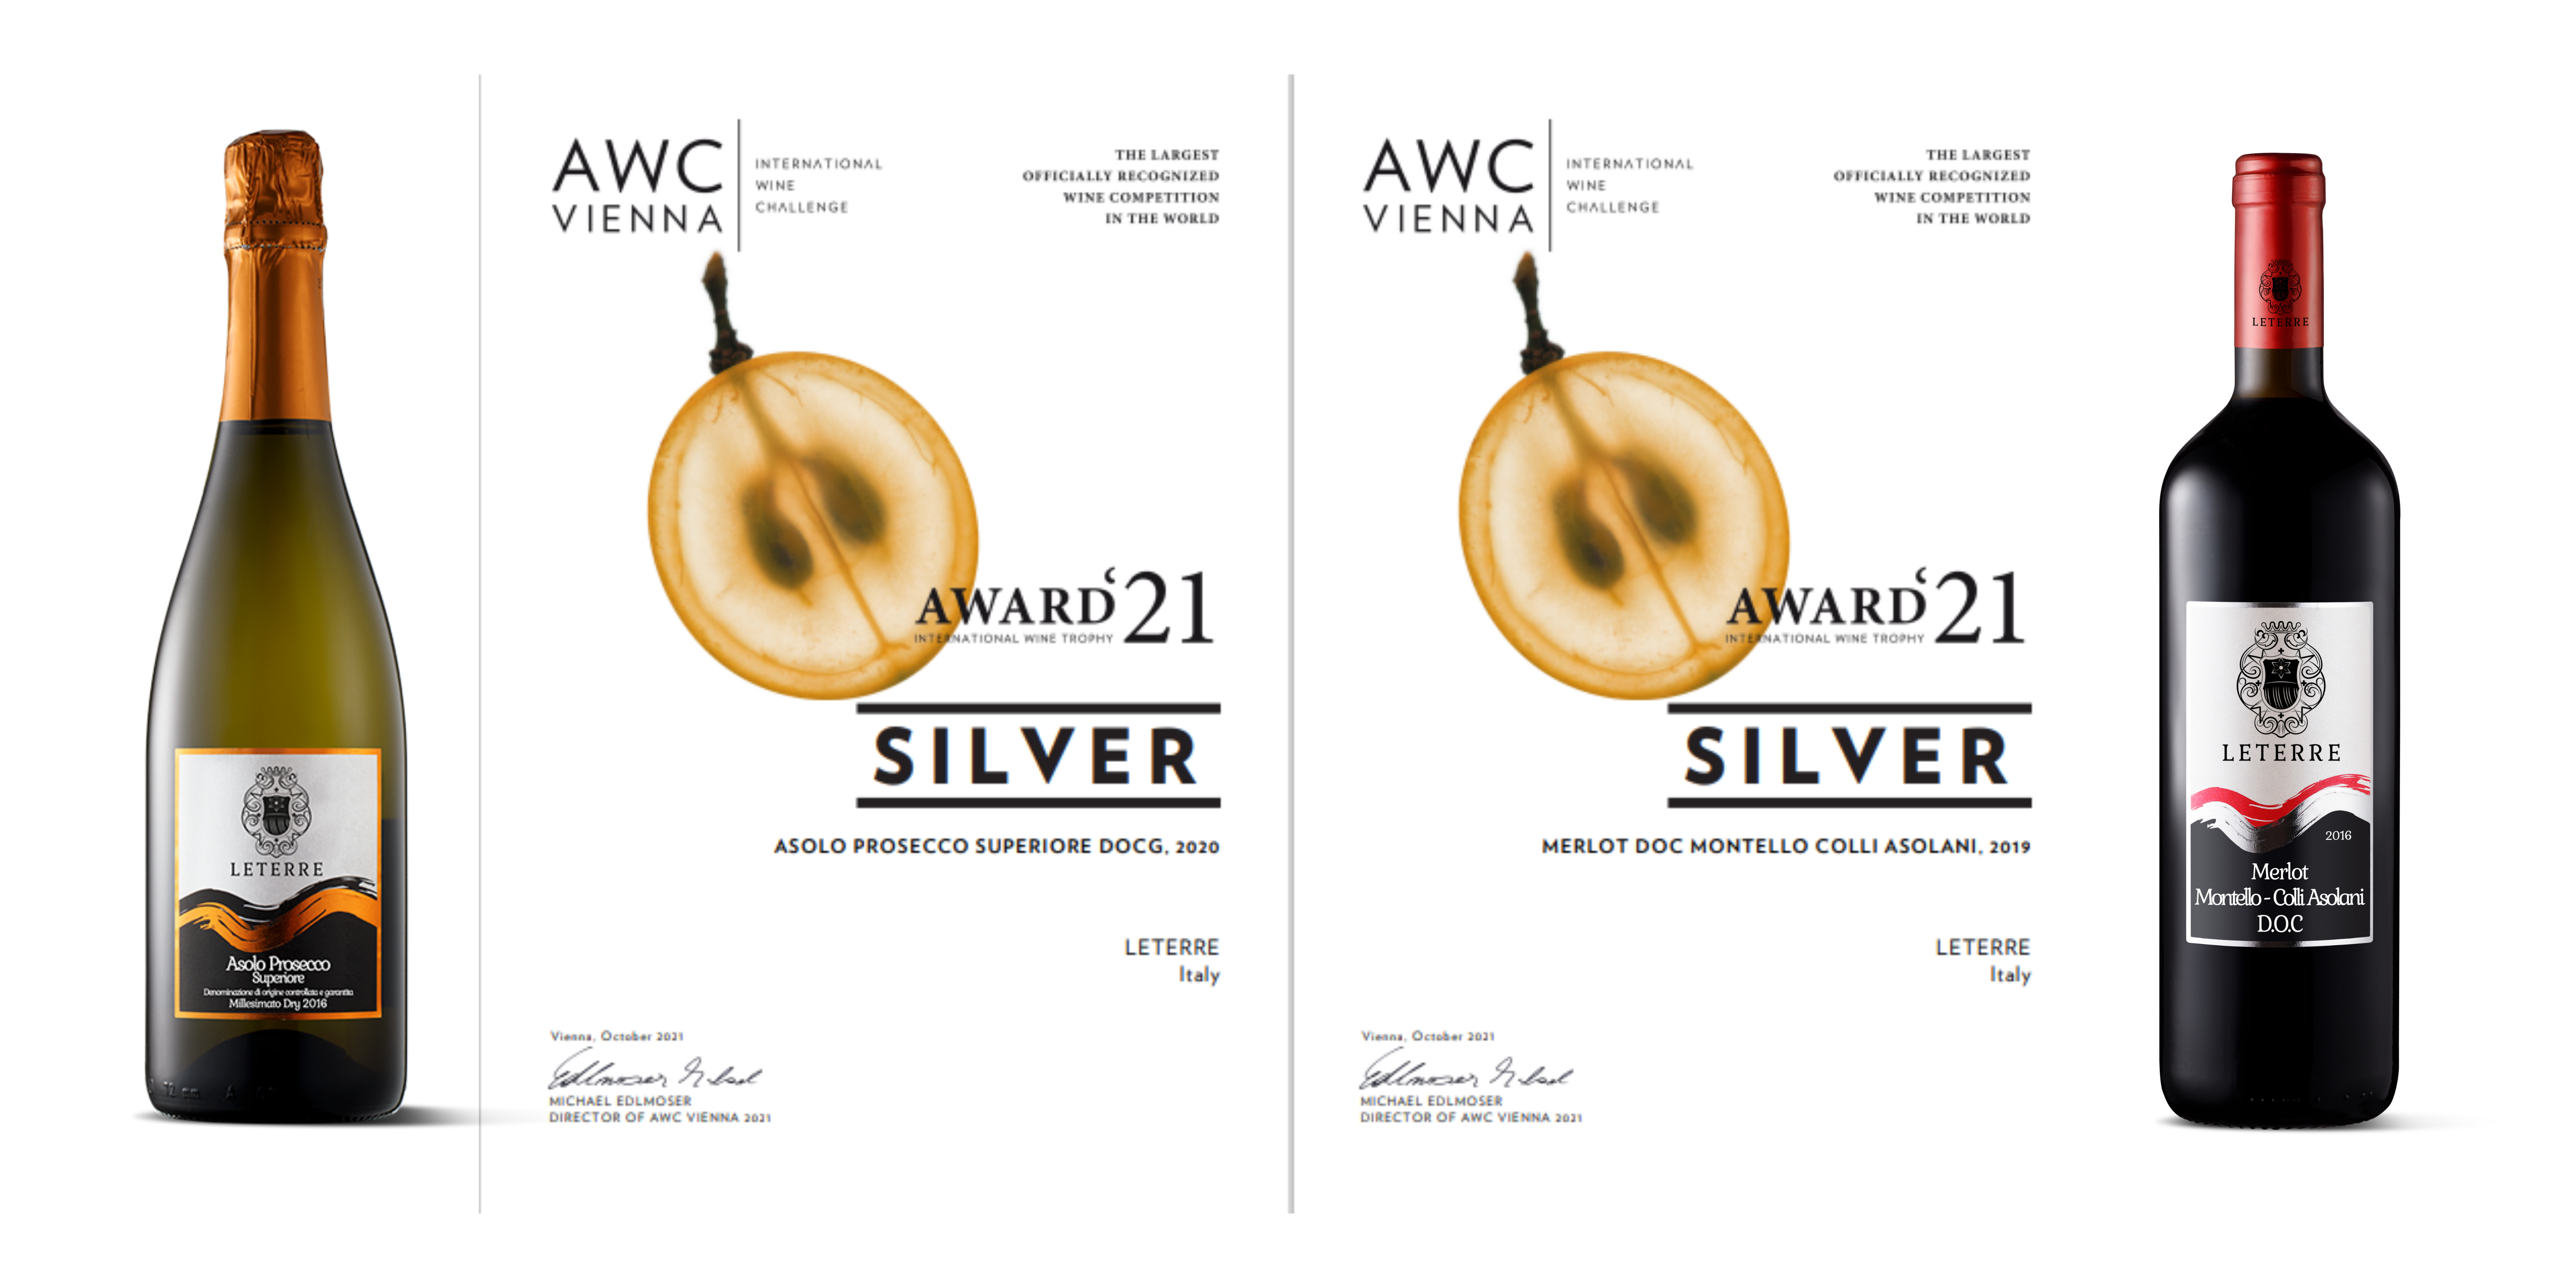 SILVER MEDAL – AWC VIENNA 2021